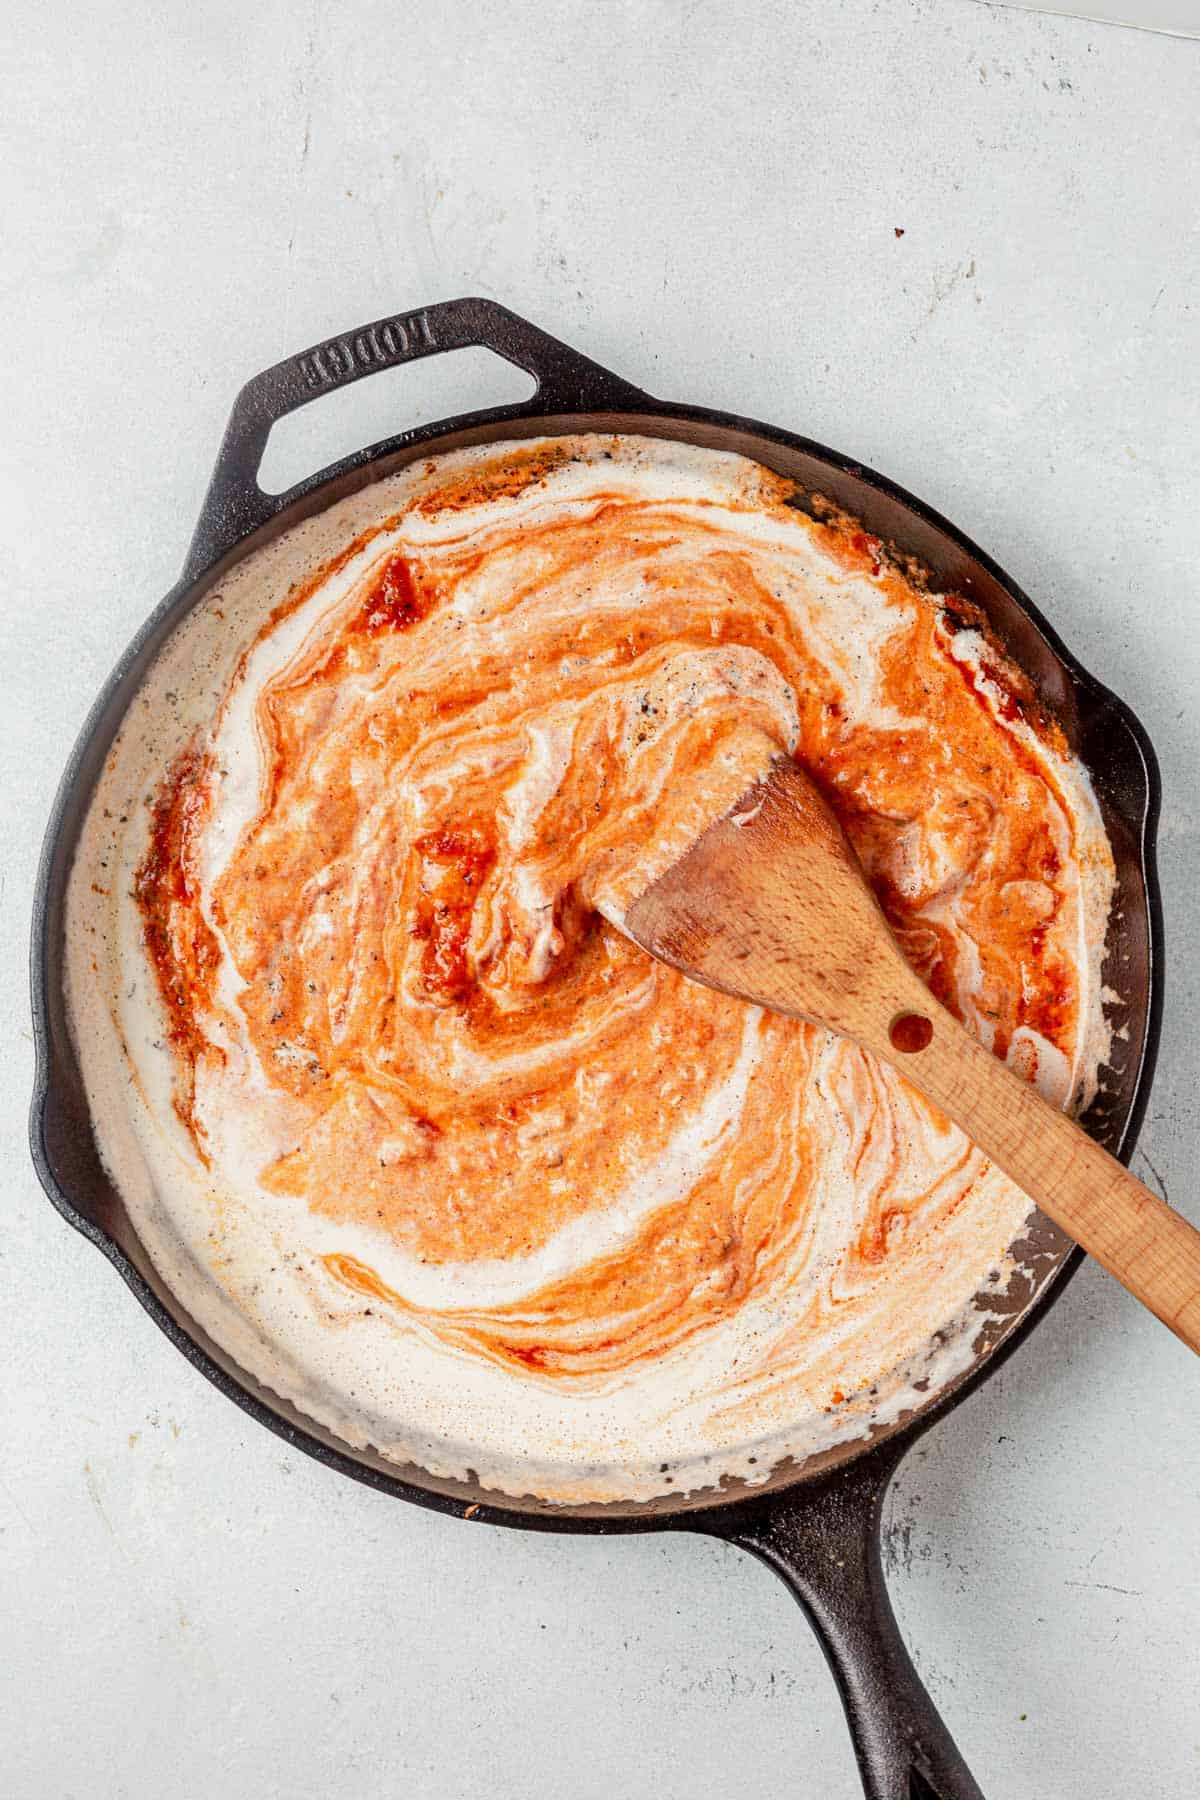 cashew cream and tomato sauce mixed in a pan